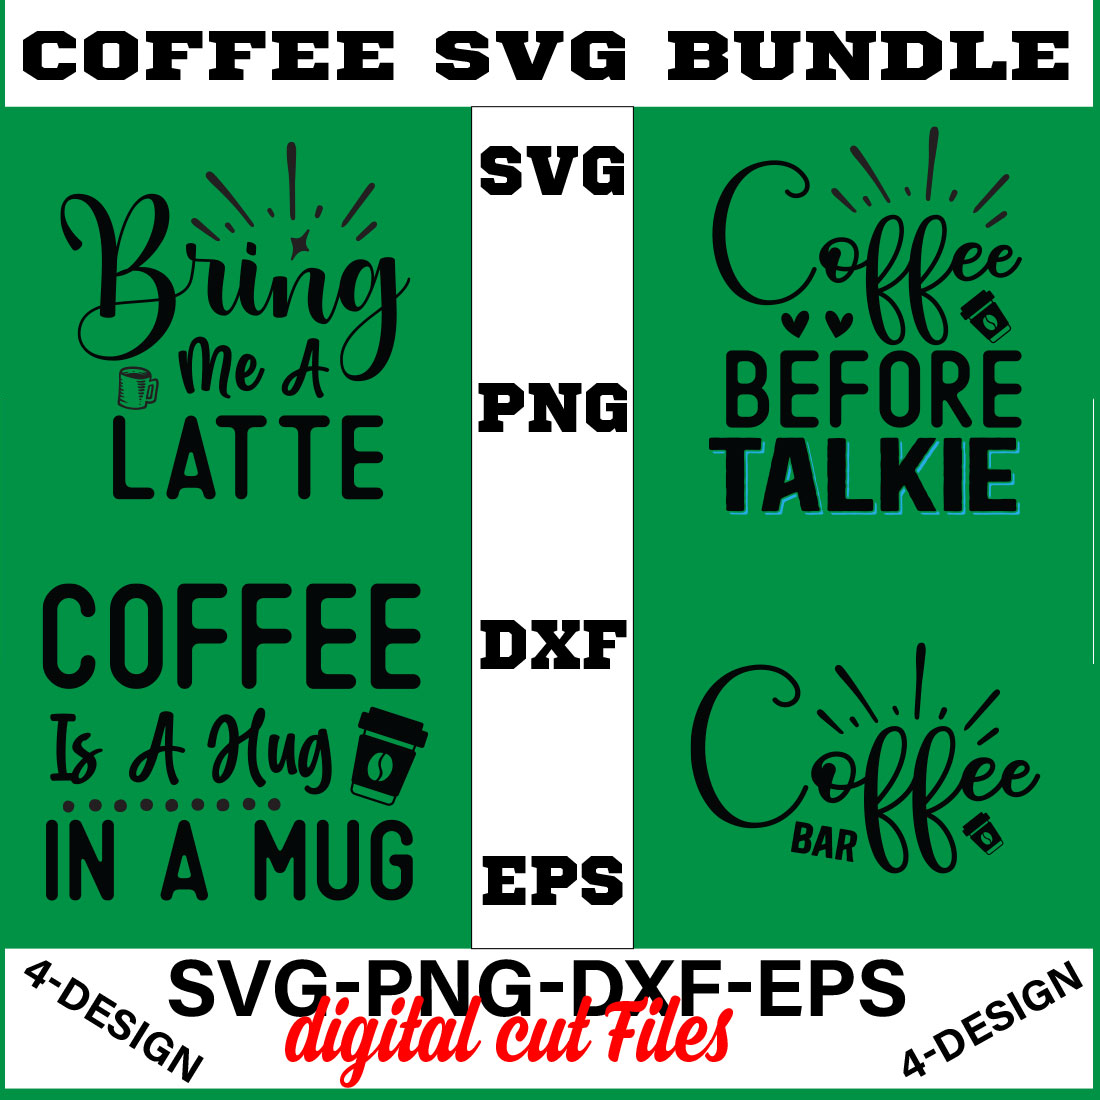 Coffee SVG Bundle, Funny Coffee SVG, Coffee Quote Svg, Caffeine Queen, Coffee Lovers, Coffee Obsessed Volume-05 cover image.